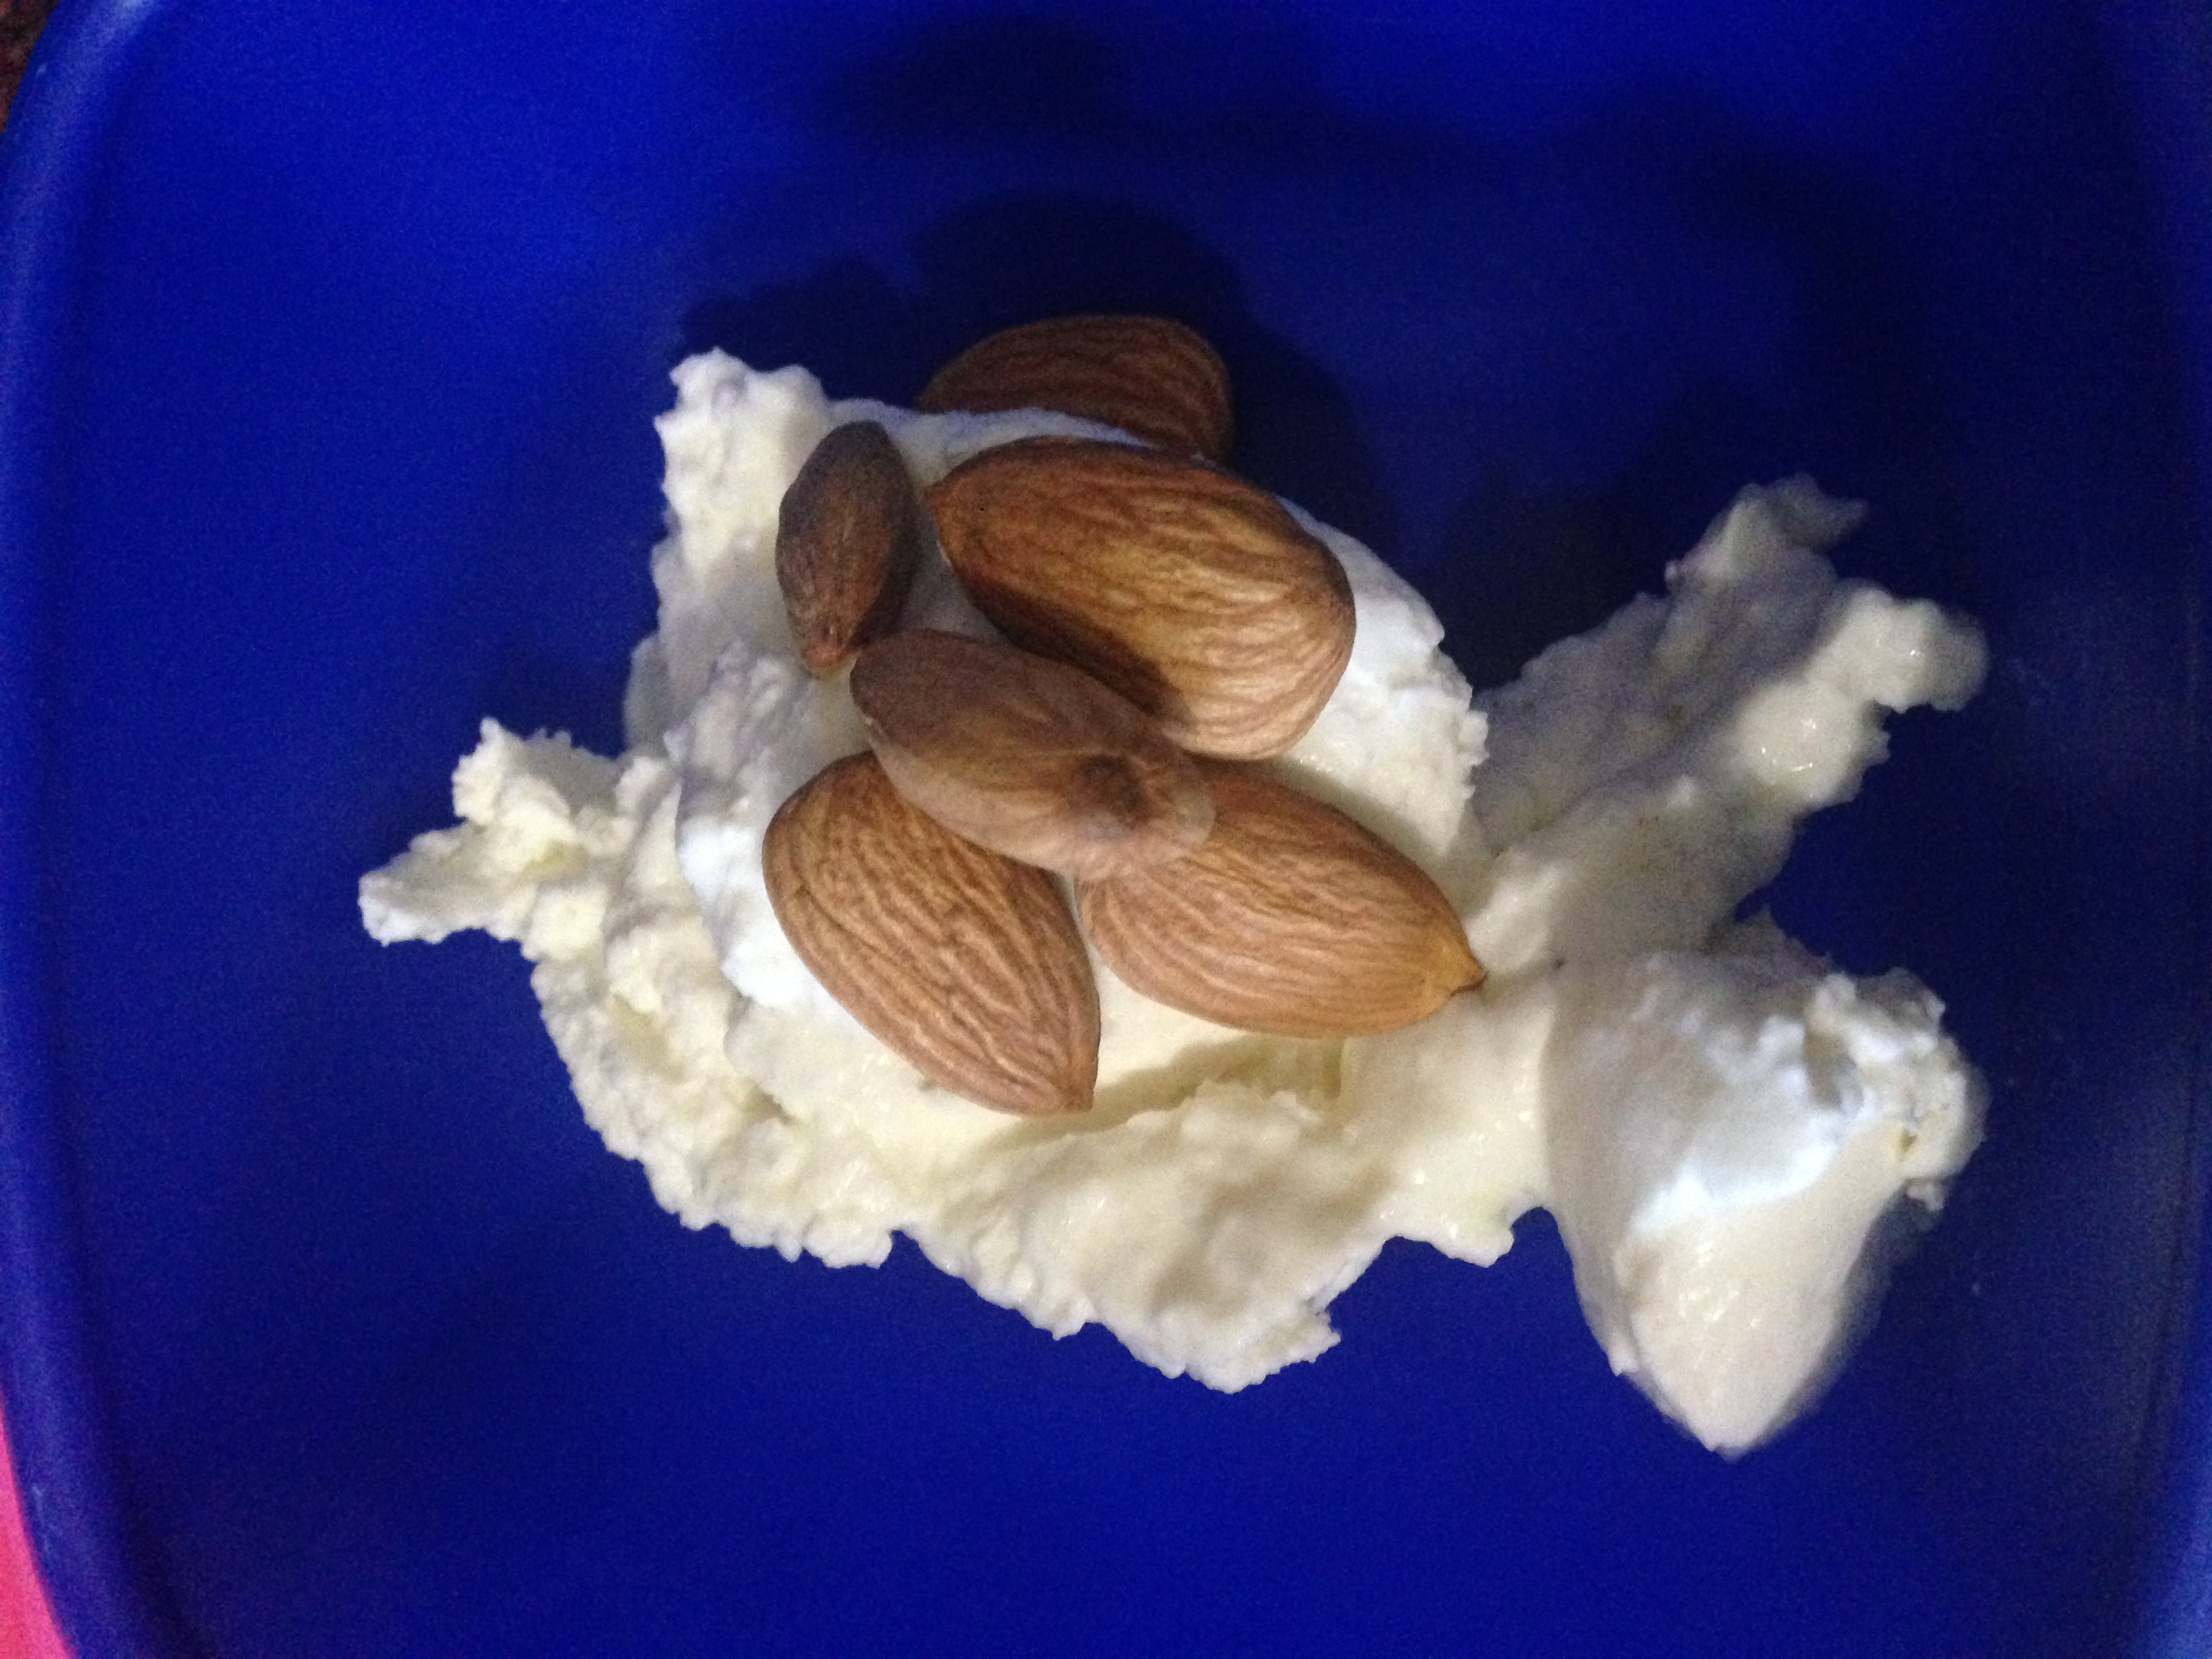 Keto Dessert – Hung Curd with Almonds